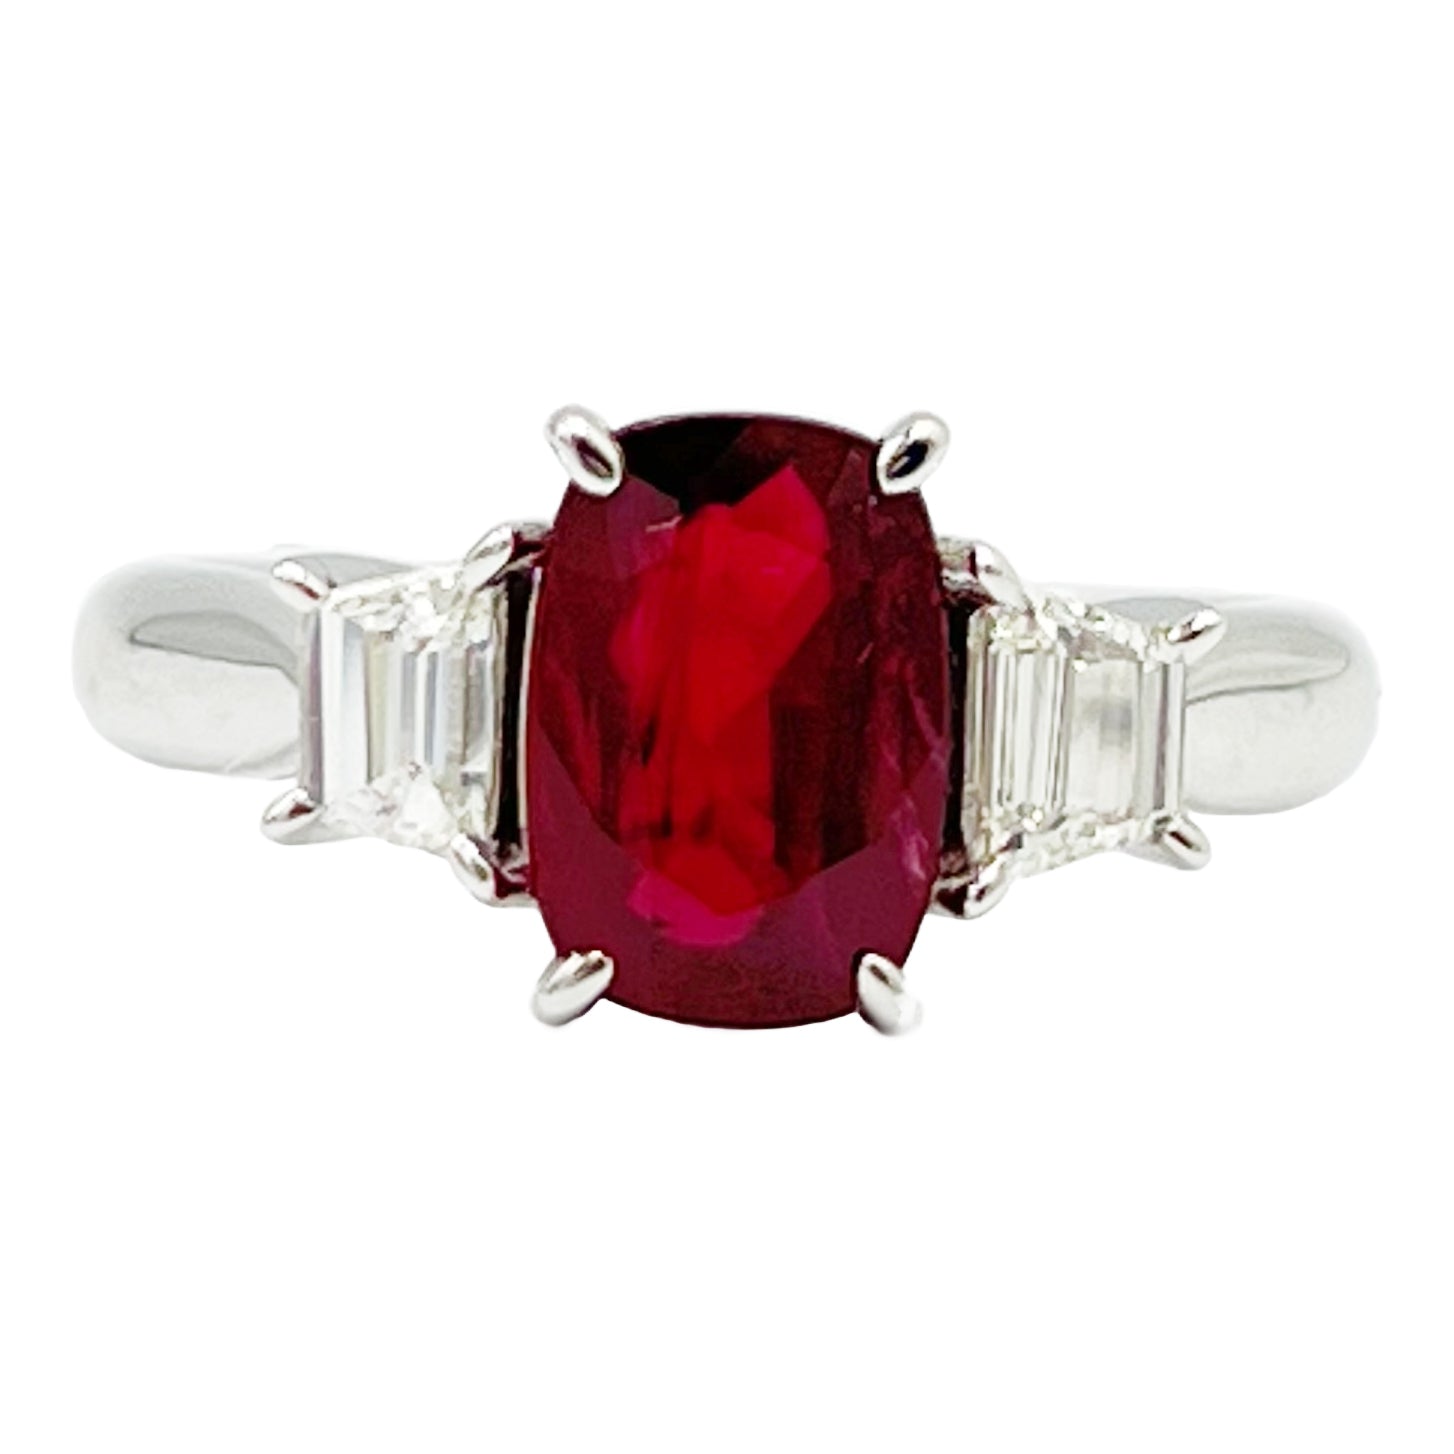 Ring 18KW/4.1G 1RUBY-2.01CT 2TRAP-0.43CT